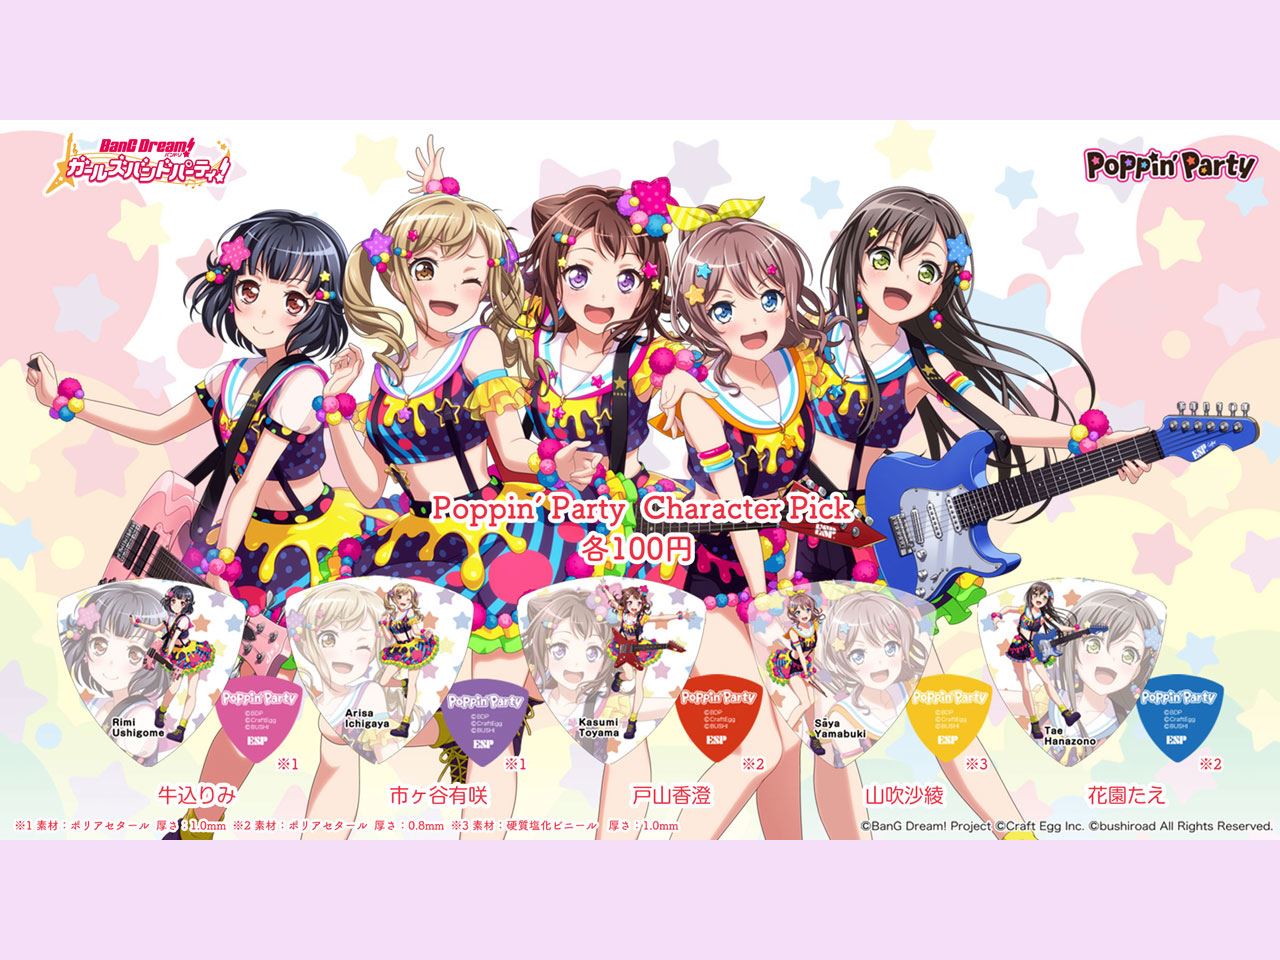 【ESP×BanG Dream!コラボピック】Poppin' Party Character Pick 全5種（各1枚）セット